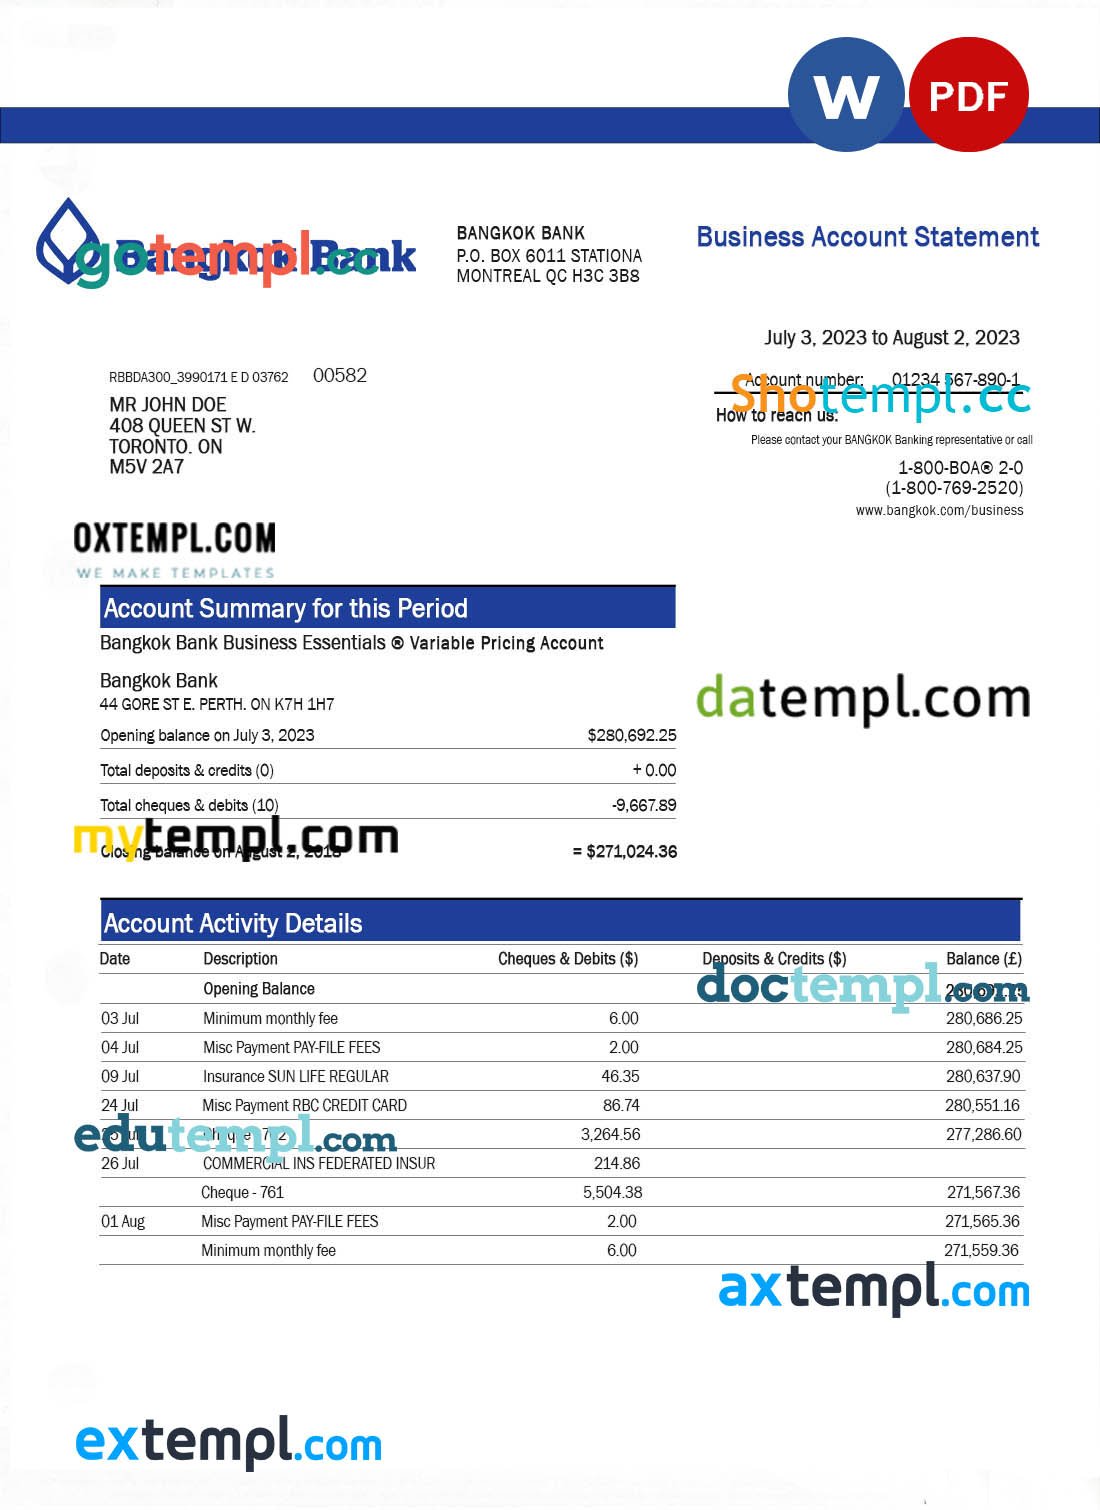 Ireland WooCommerce tax invoice template in .doc and .pdf format, fully editable